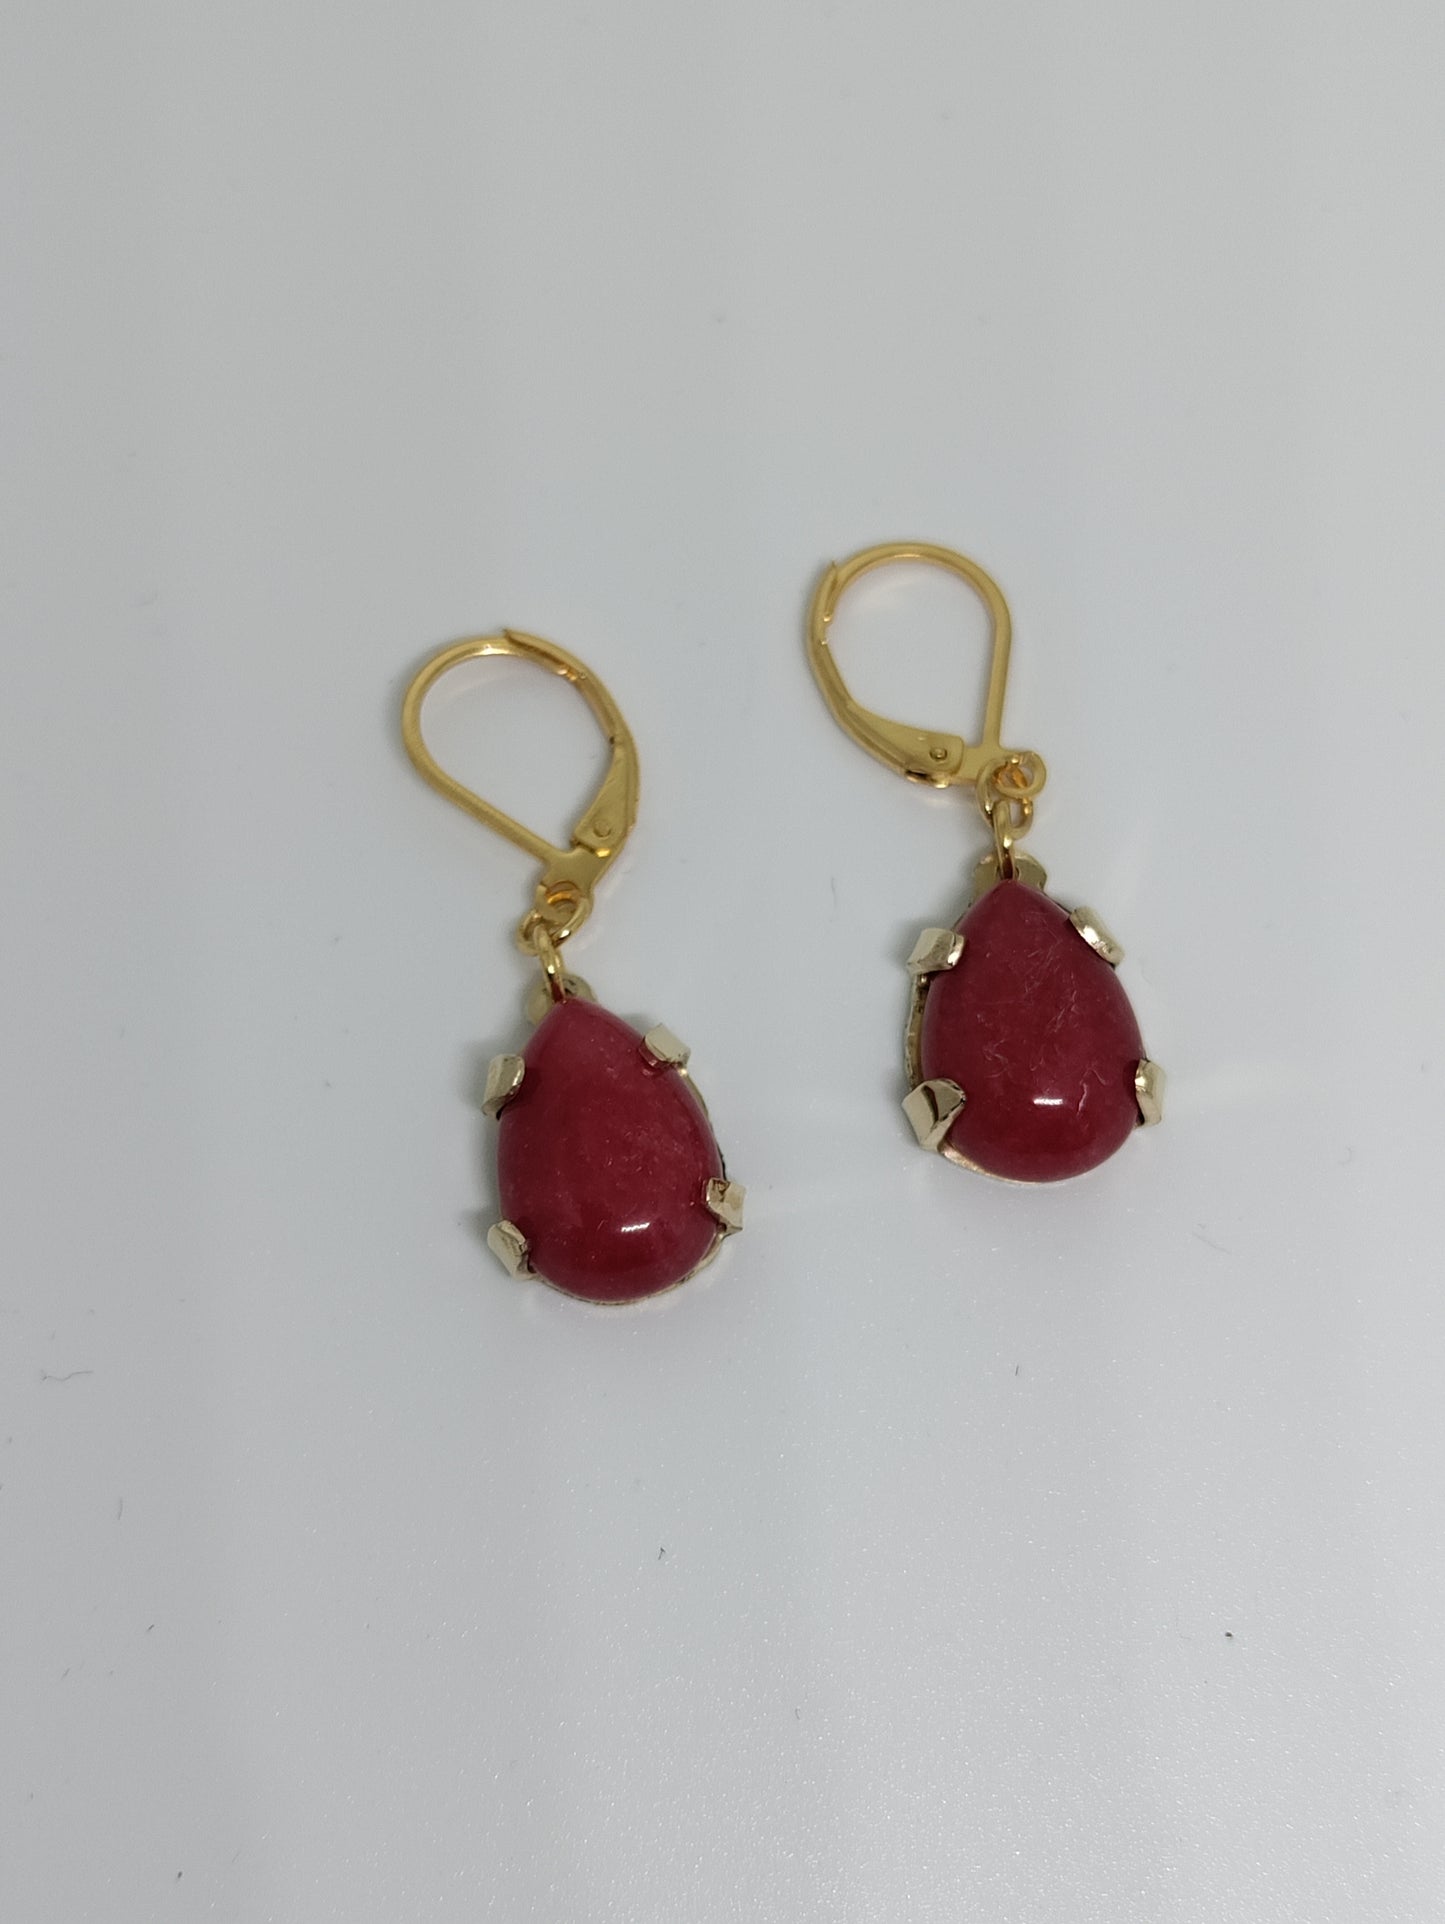 Golden drop earrings with natural red stones LEIA&CO